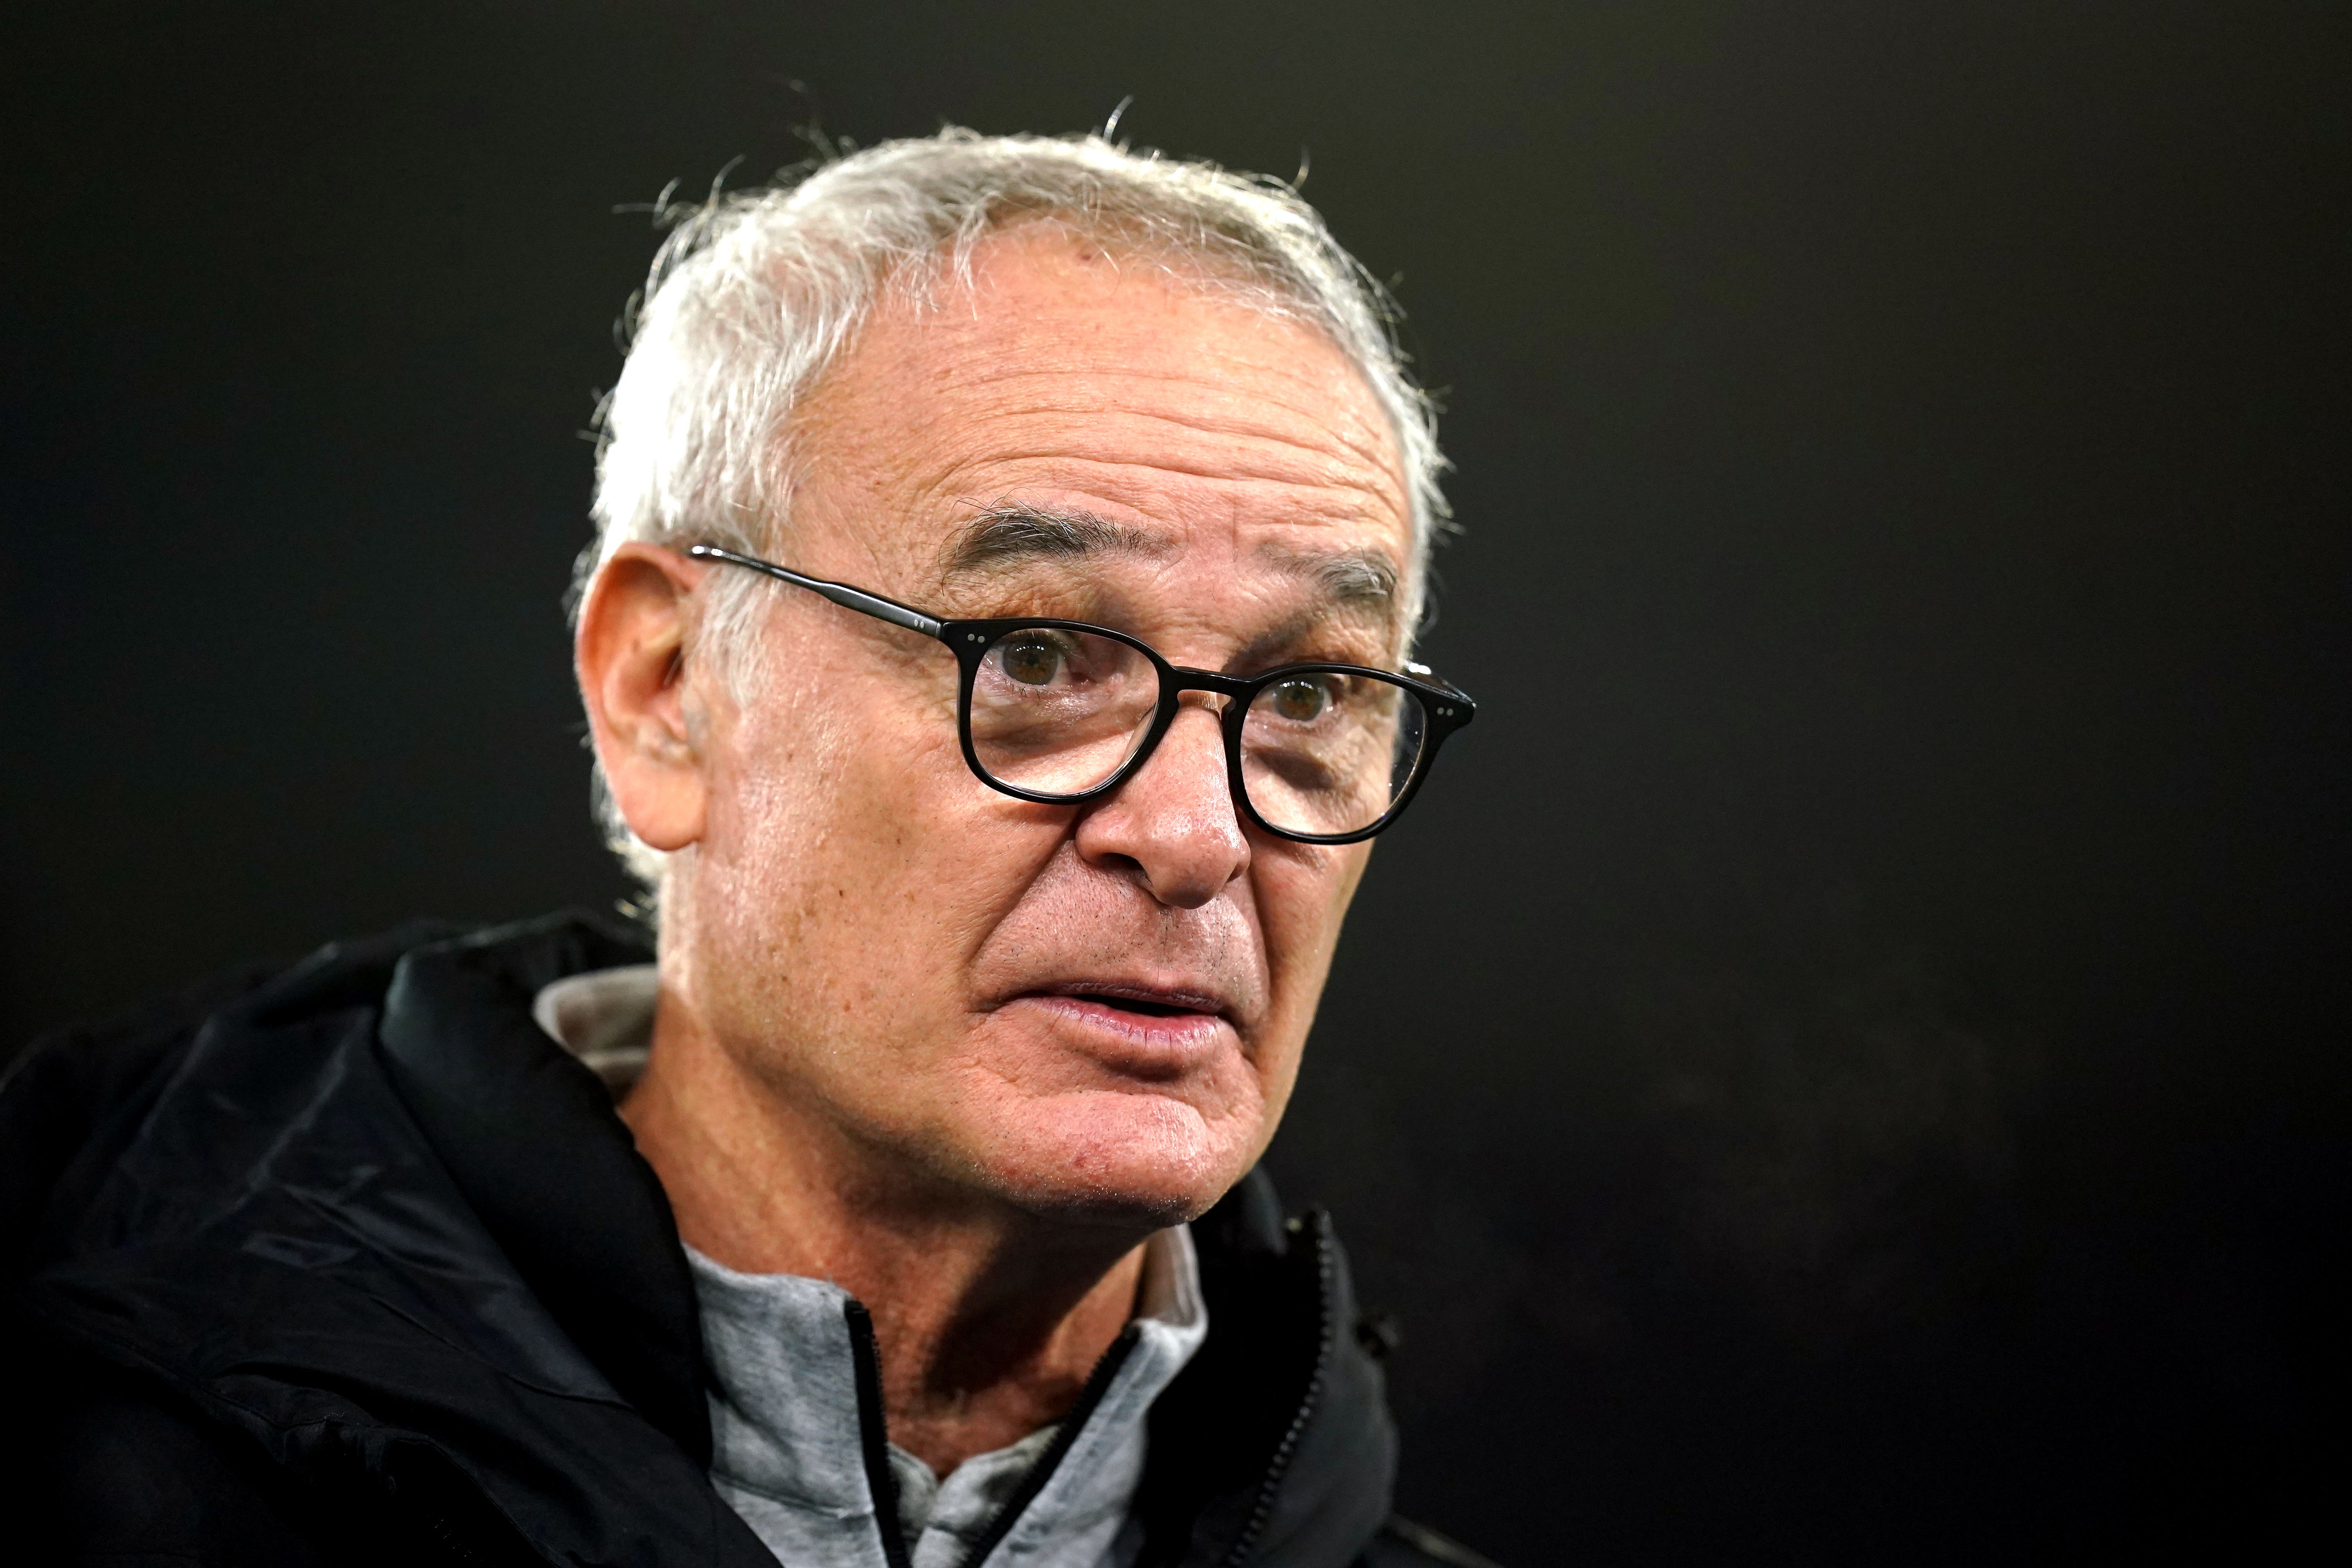 Ranieri's Cagliari looking to beat the odds of Serie A survival along with  Frosinone and Genoa - The San Diego Union-Tribune